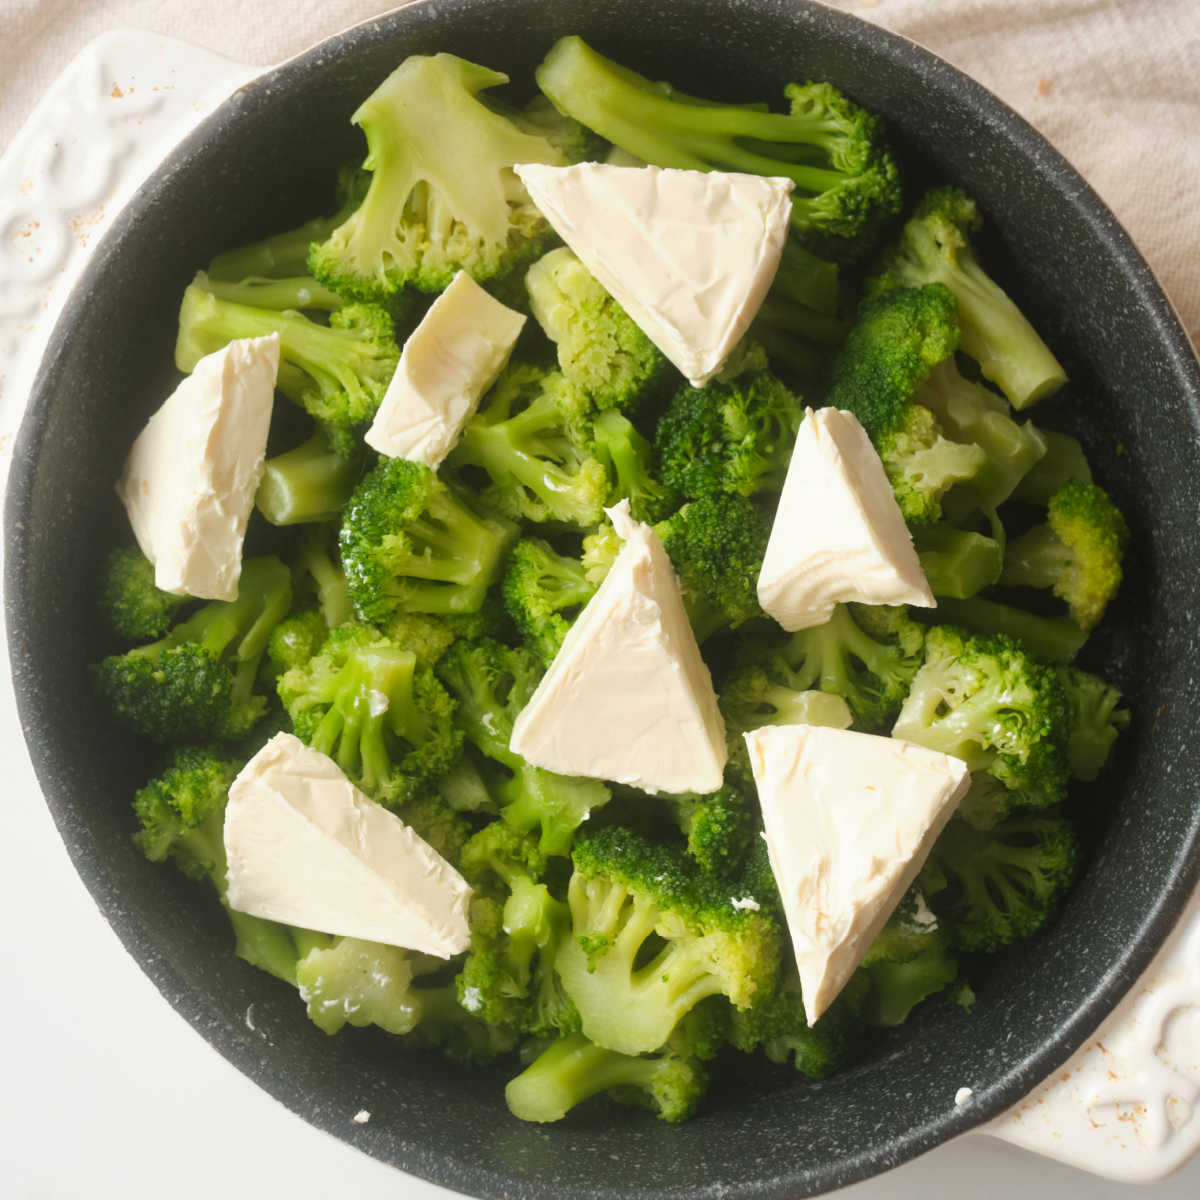 laughing cow cheese triangles on broccoli